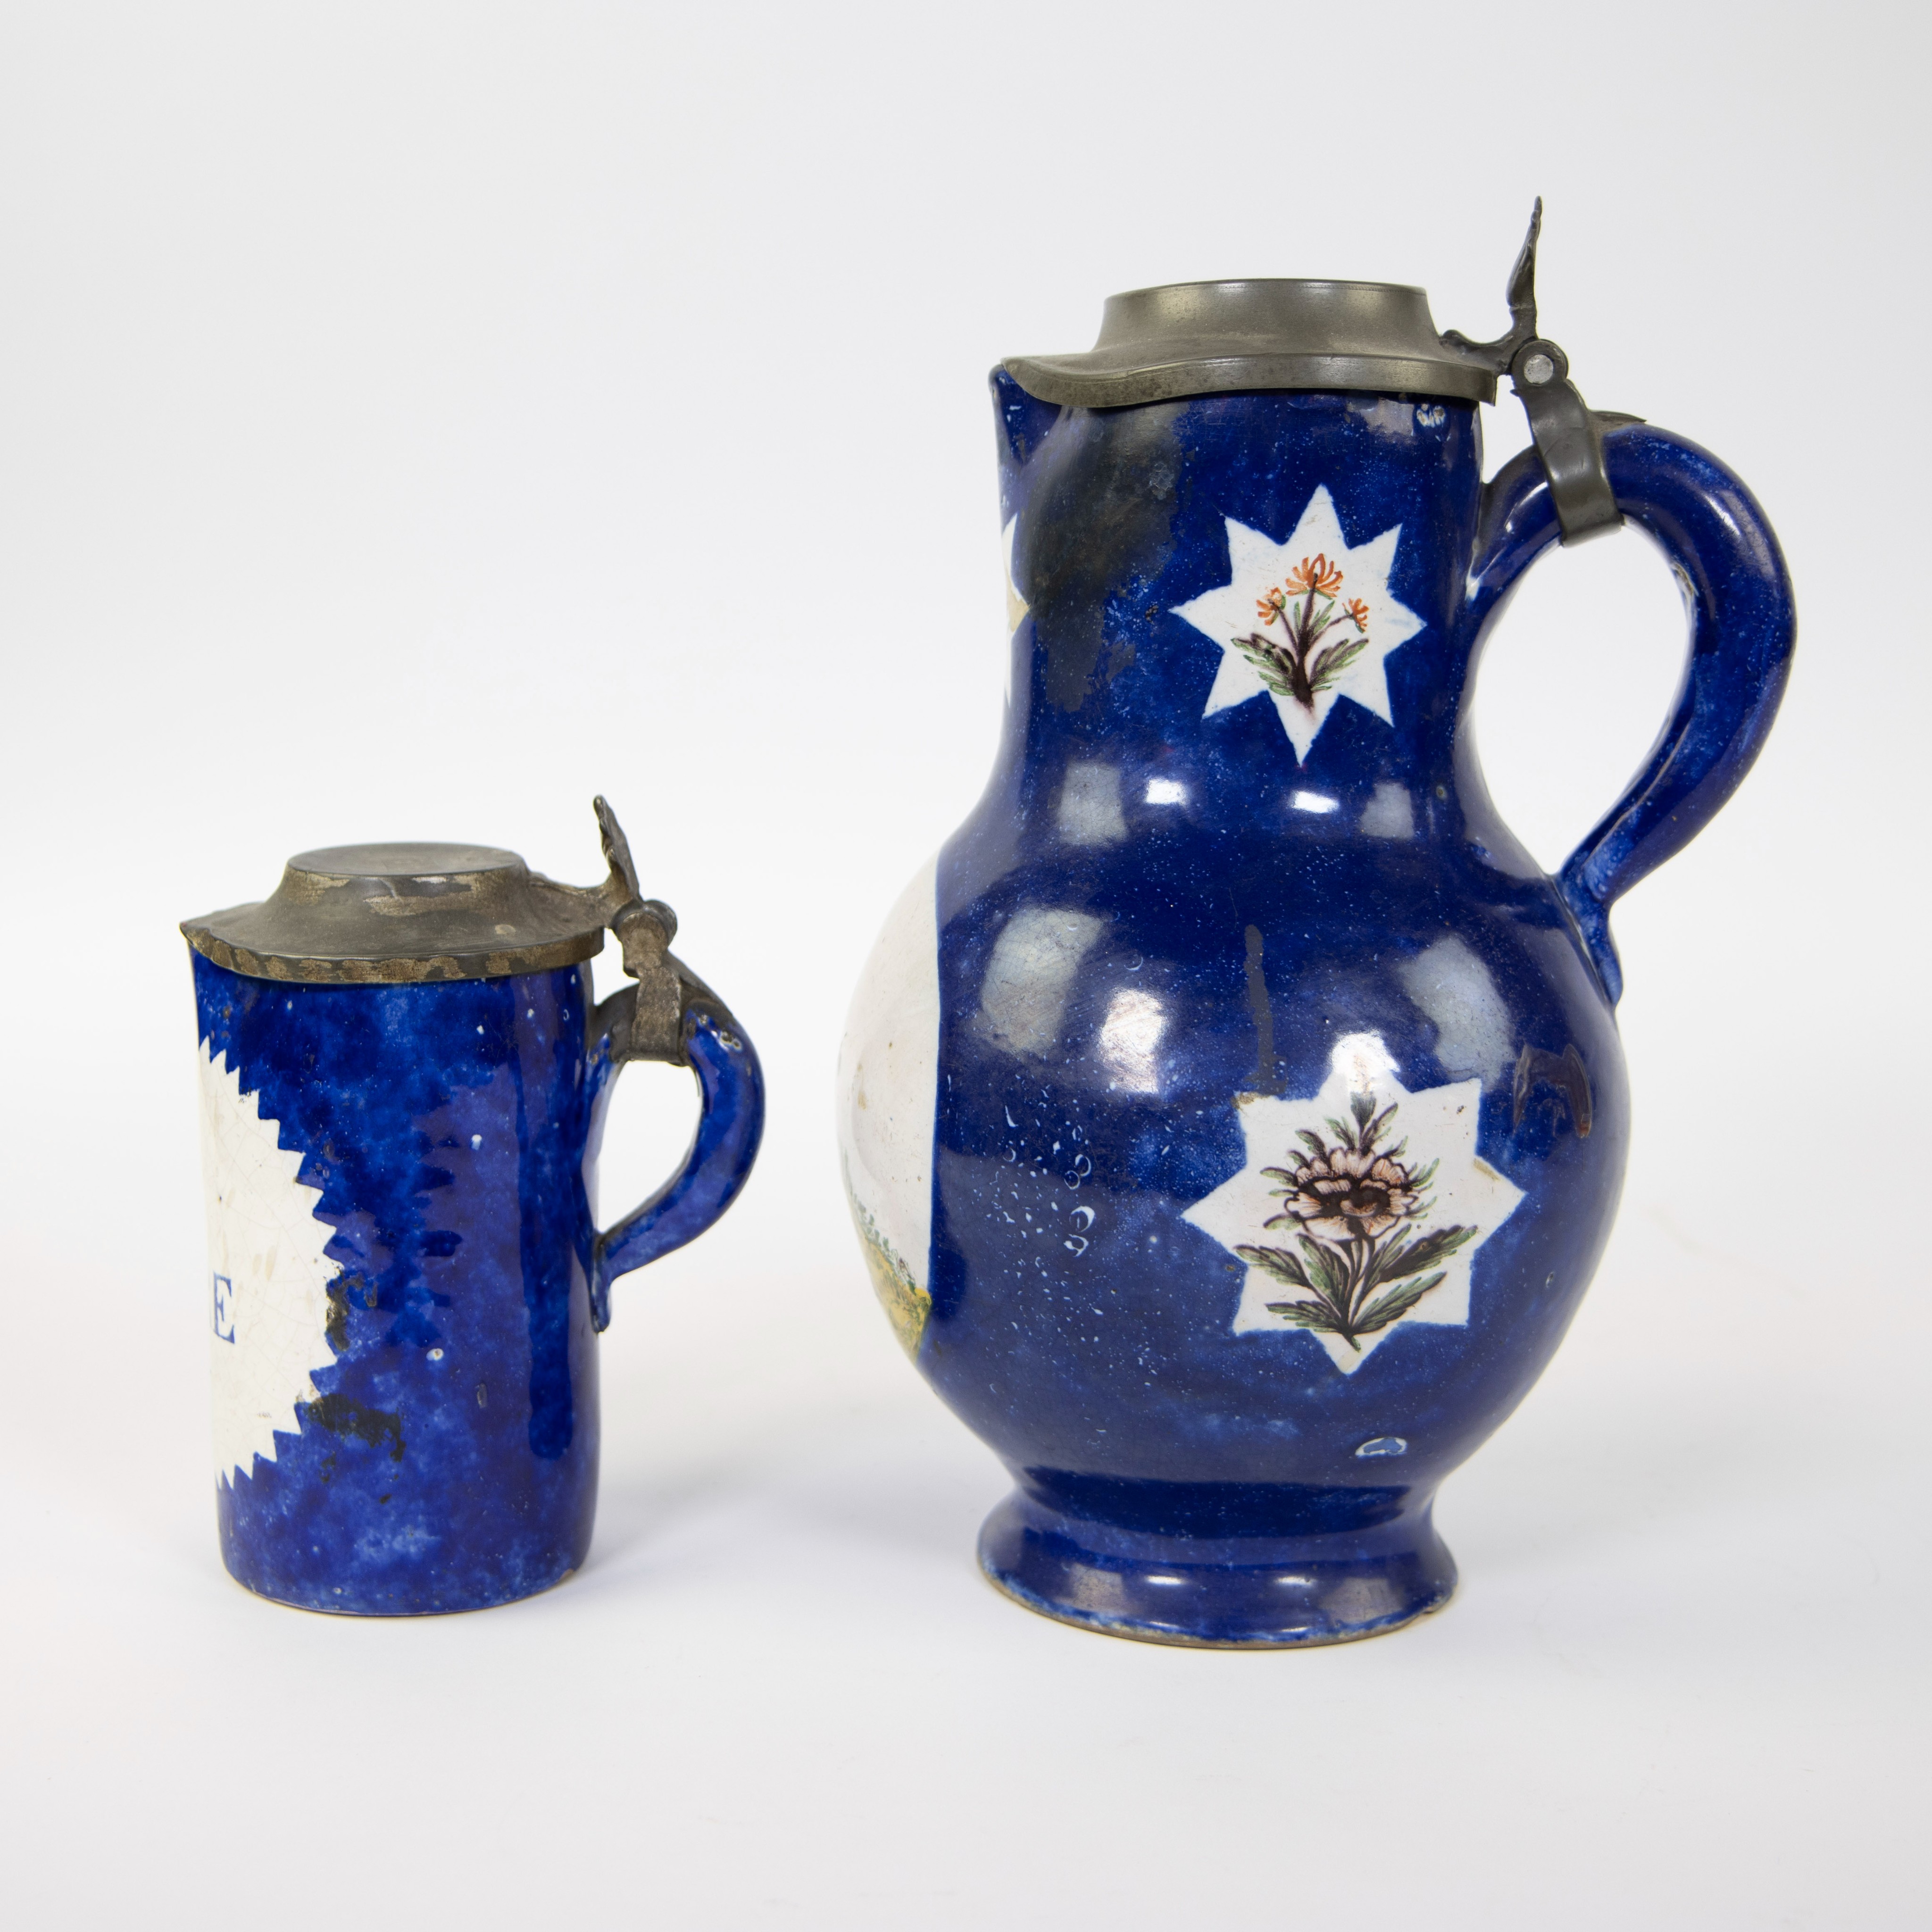 Brussels faience jug and a beer jug with pewter lid, 18th century - Image 2 of 5